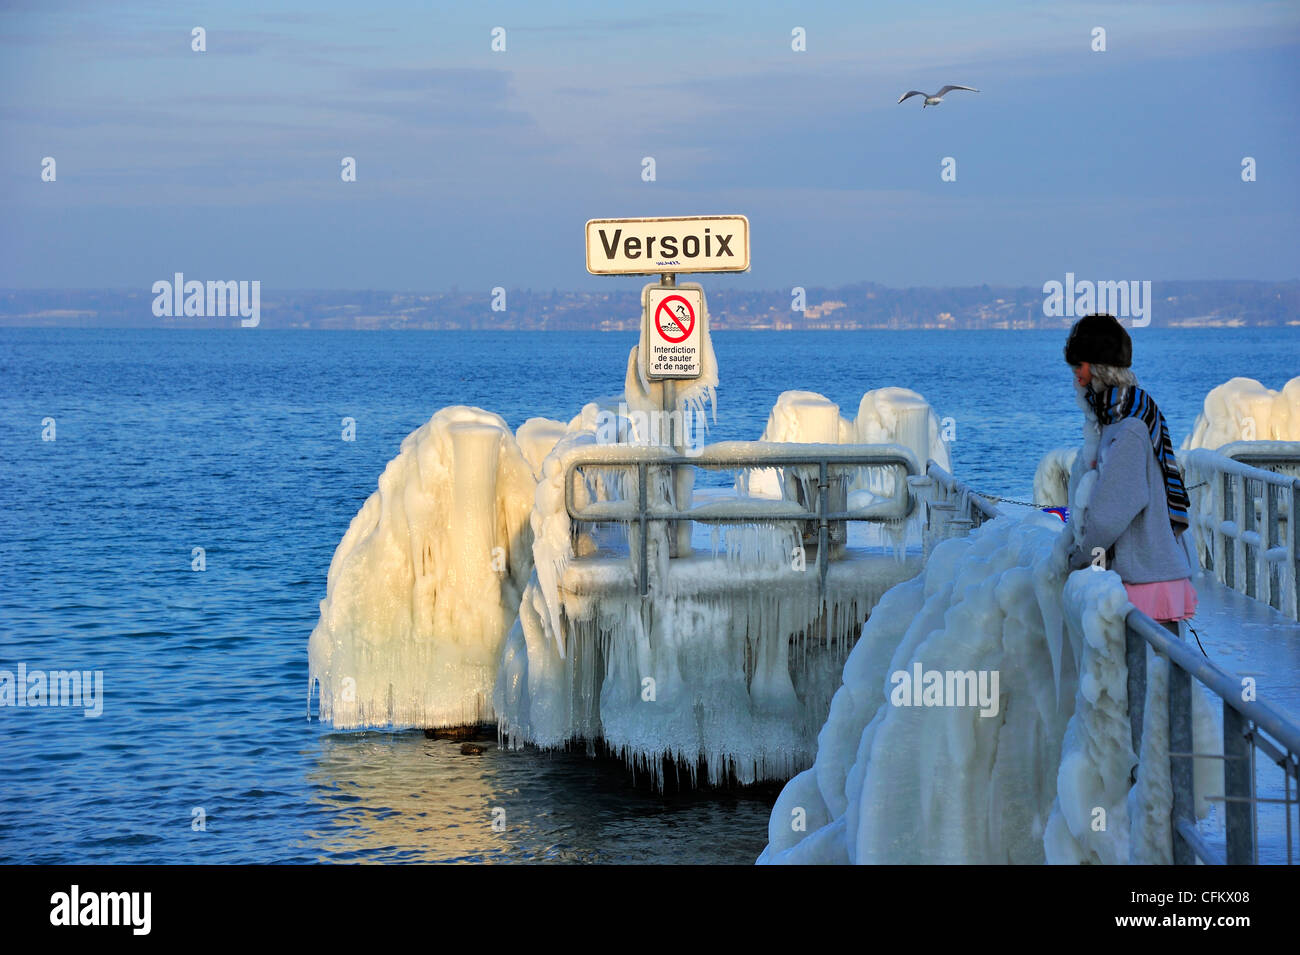 The jetty at Versoix, Lake Geneva, covered with ice. The figure in the image is not a person but a shop-window dummy. Stock Photo